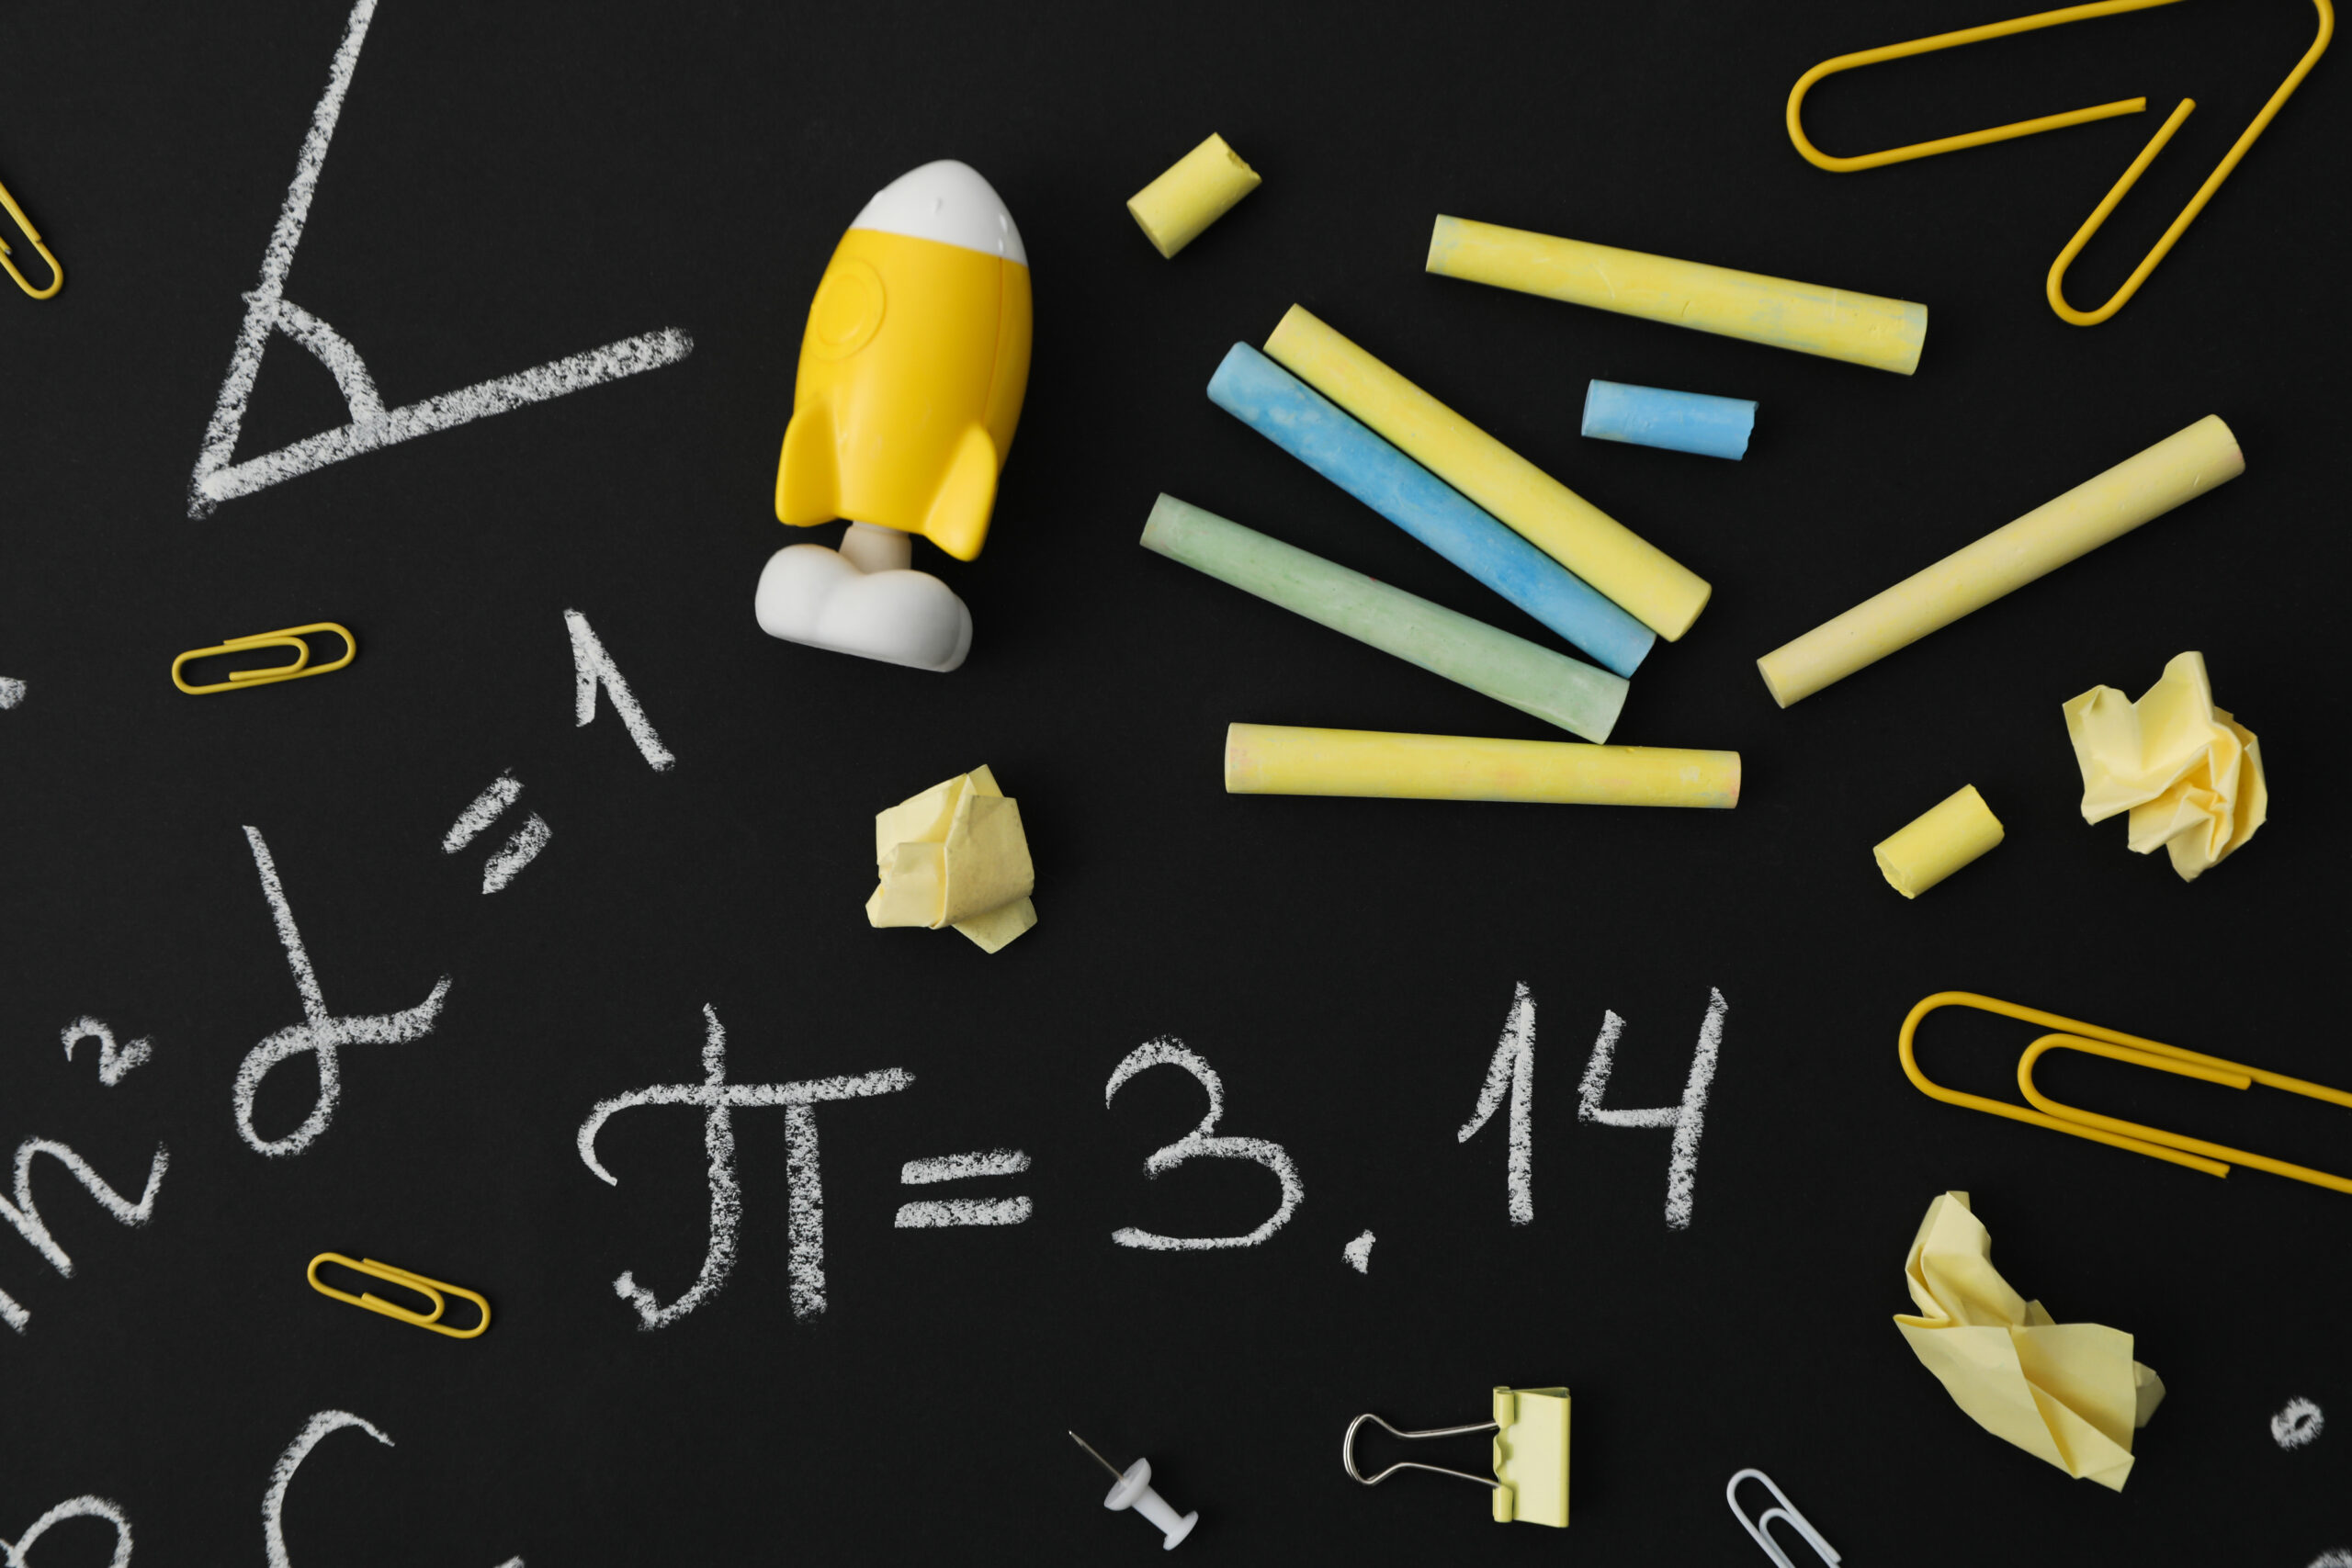 Black chalkboard with pencils and school materials spread across it. Pi number, 3.14 is written in chalk across the middle